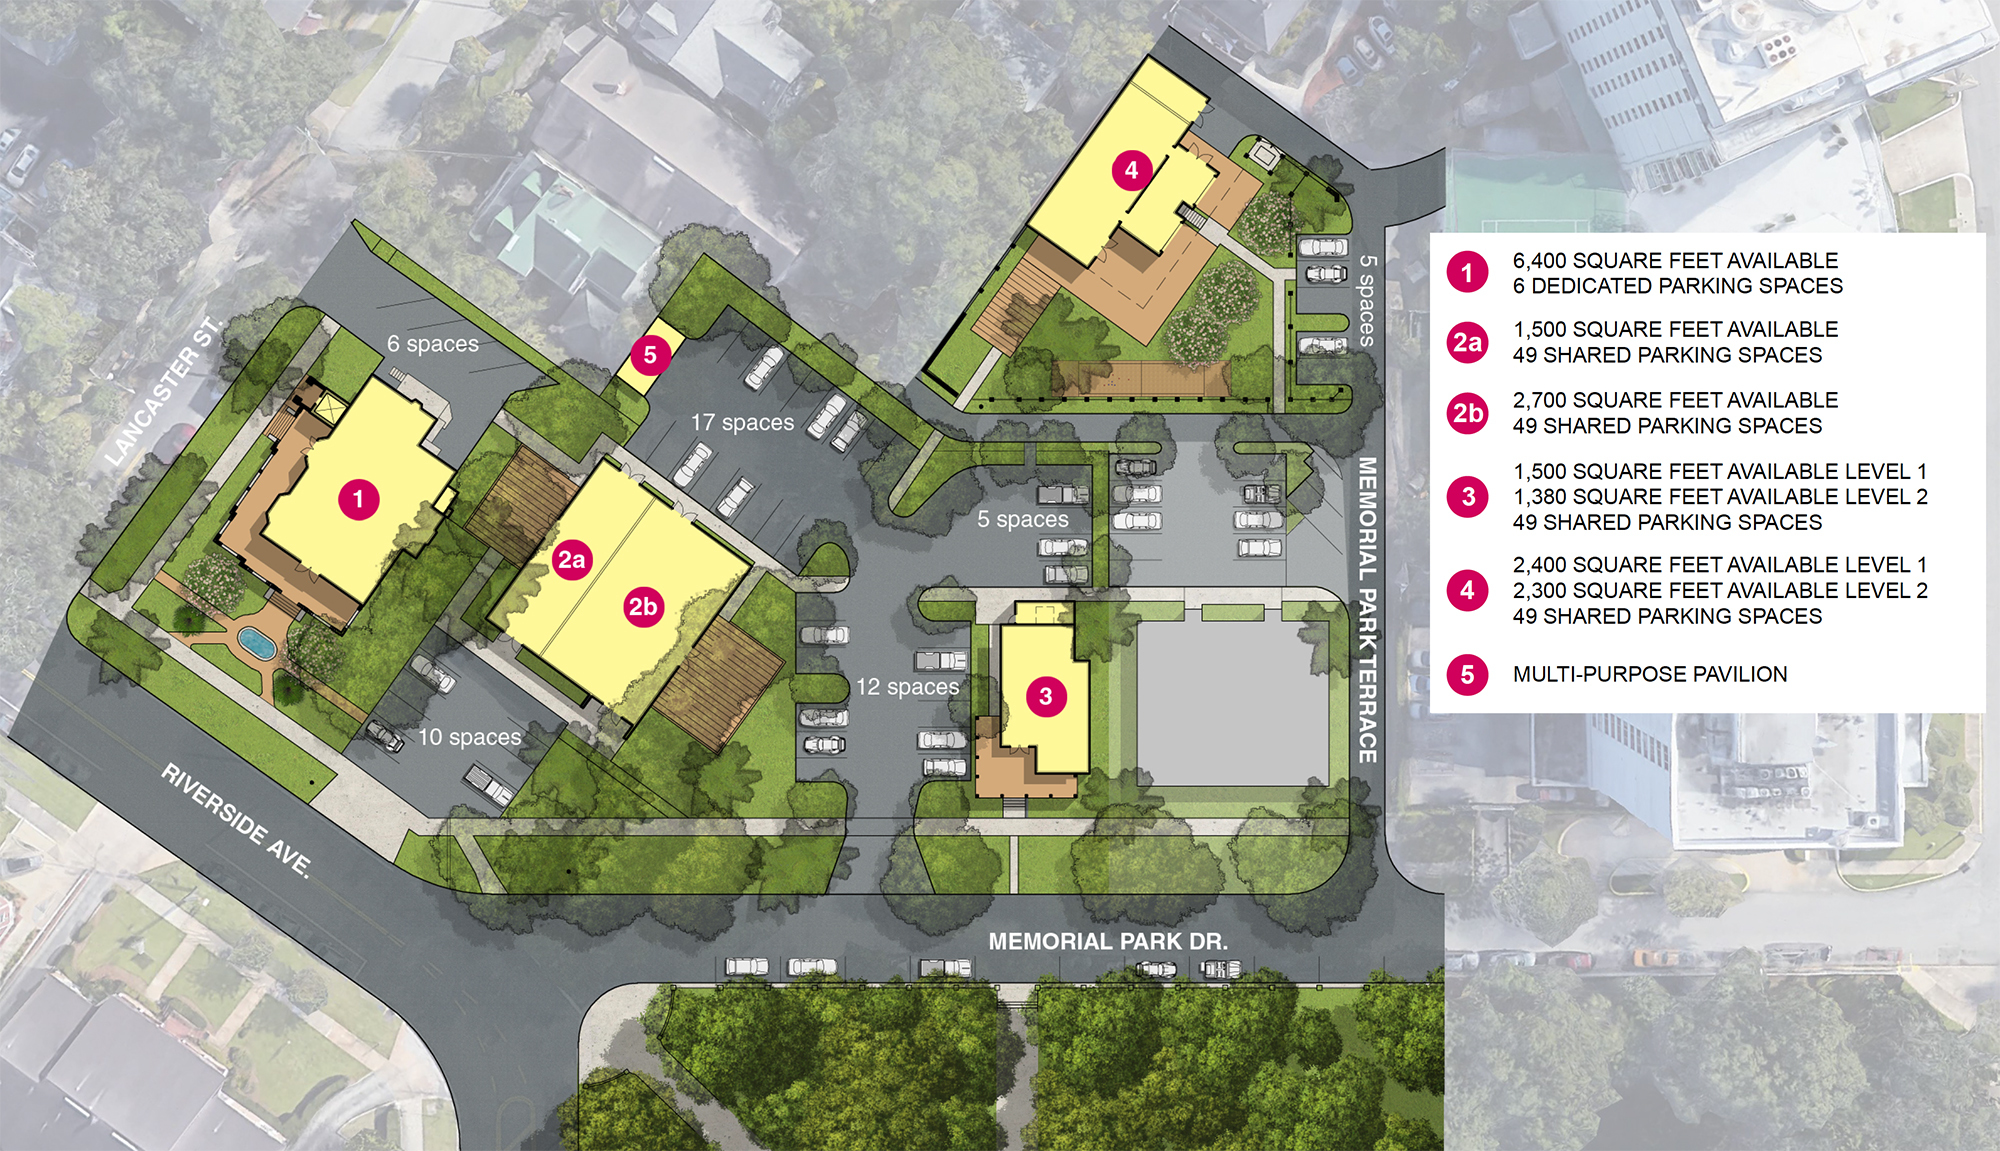 The site plan for the four buildings on the property. The site comprises 1.3 acres and is zoned commercial, residential and office.